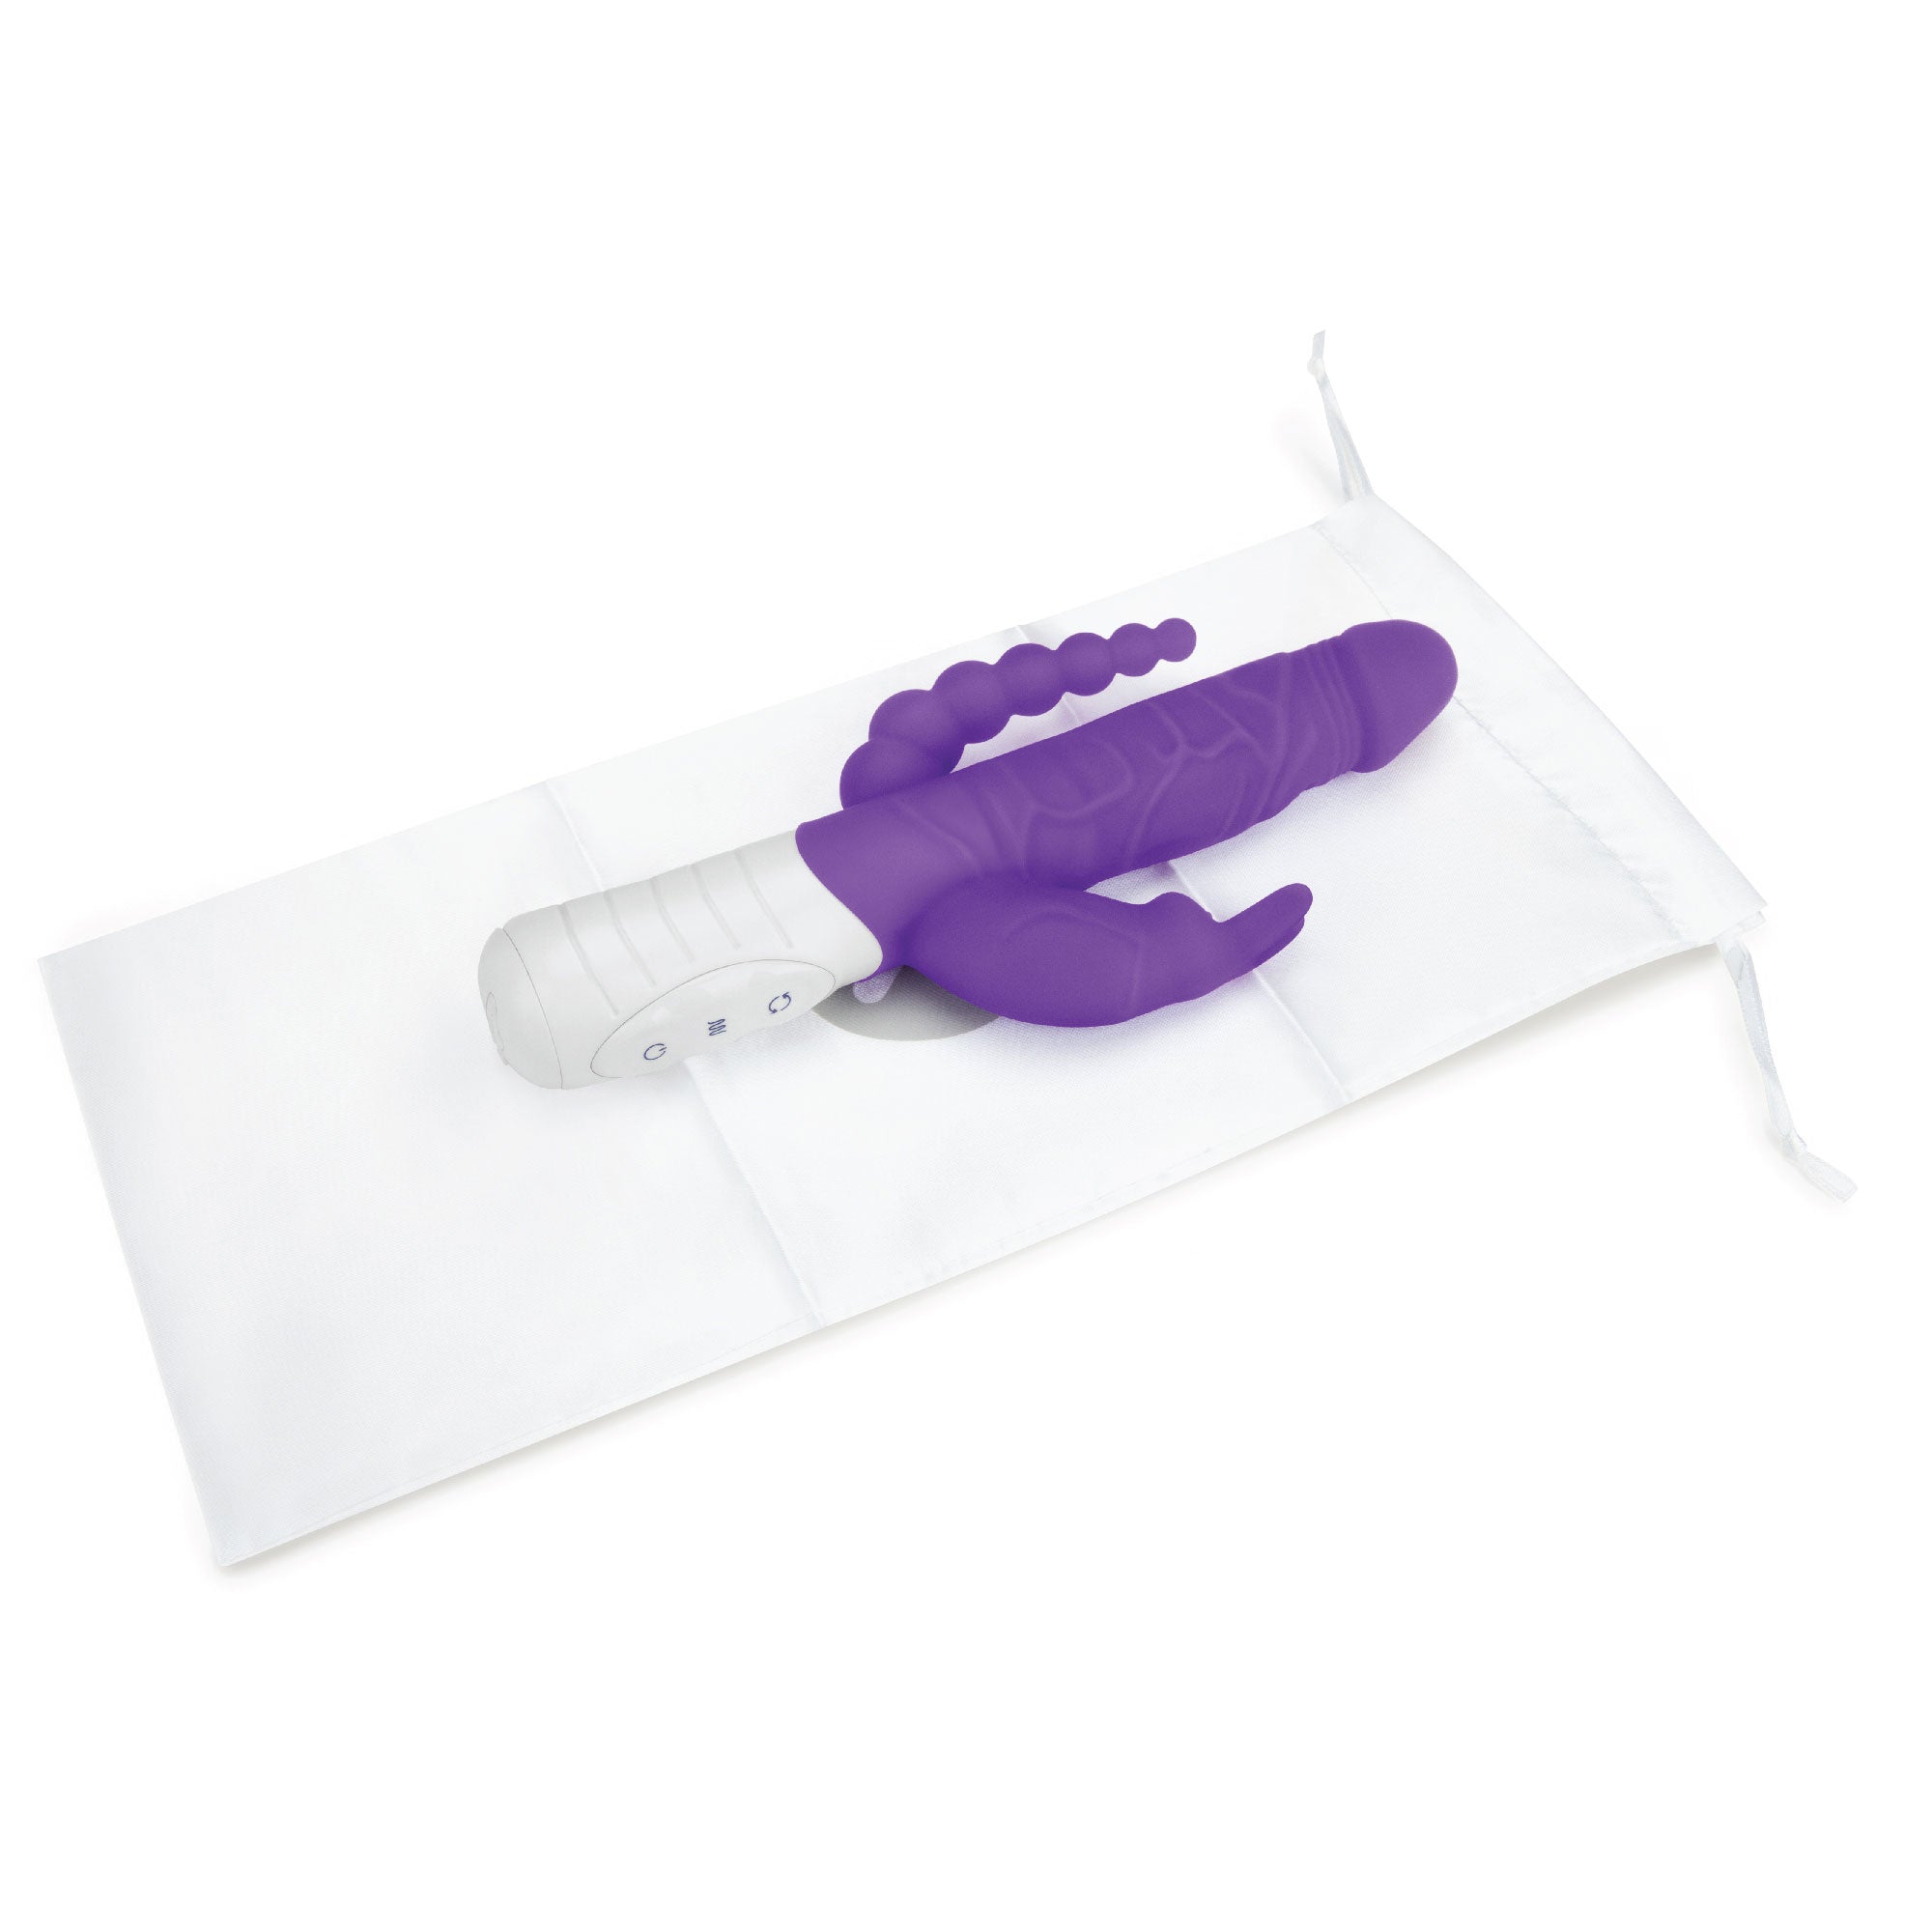 Rabbit Essentials Slim Realistic Double Penetration Rabbit Vibrator with Rotating Beads in Purple with Storage Pouch at glastoy.com